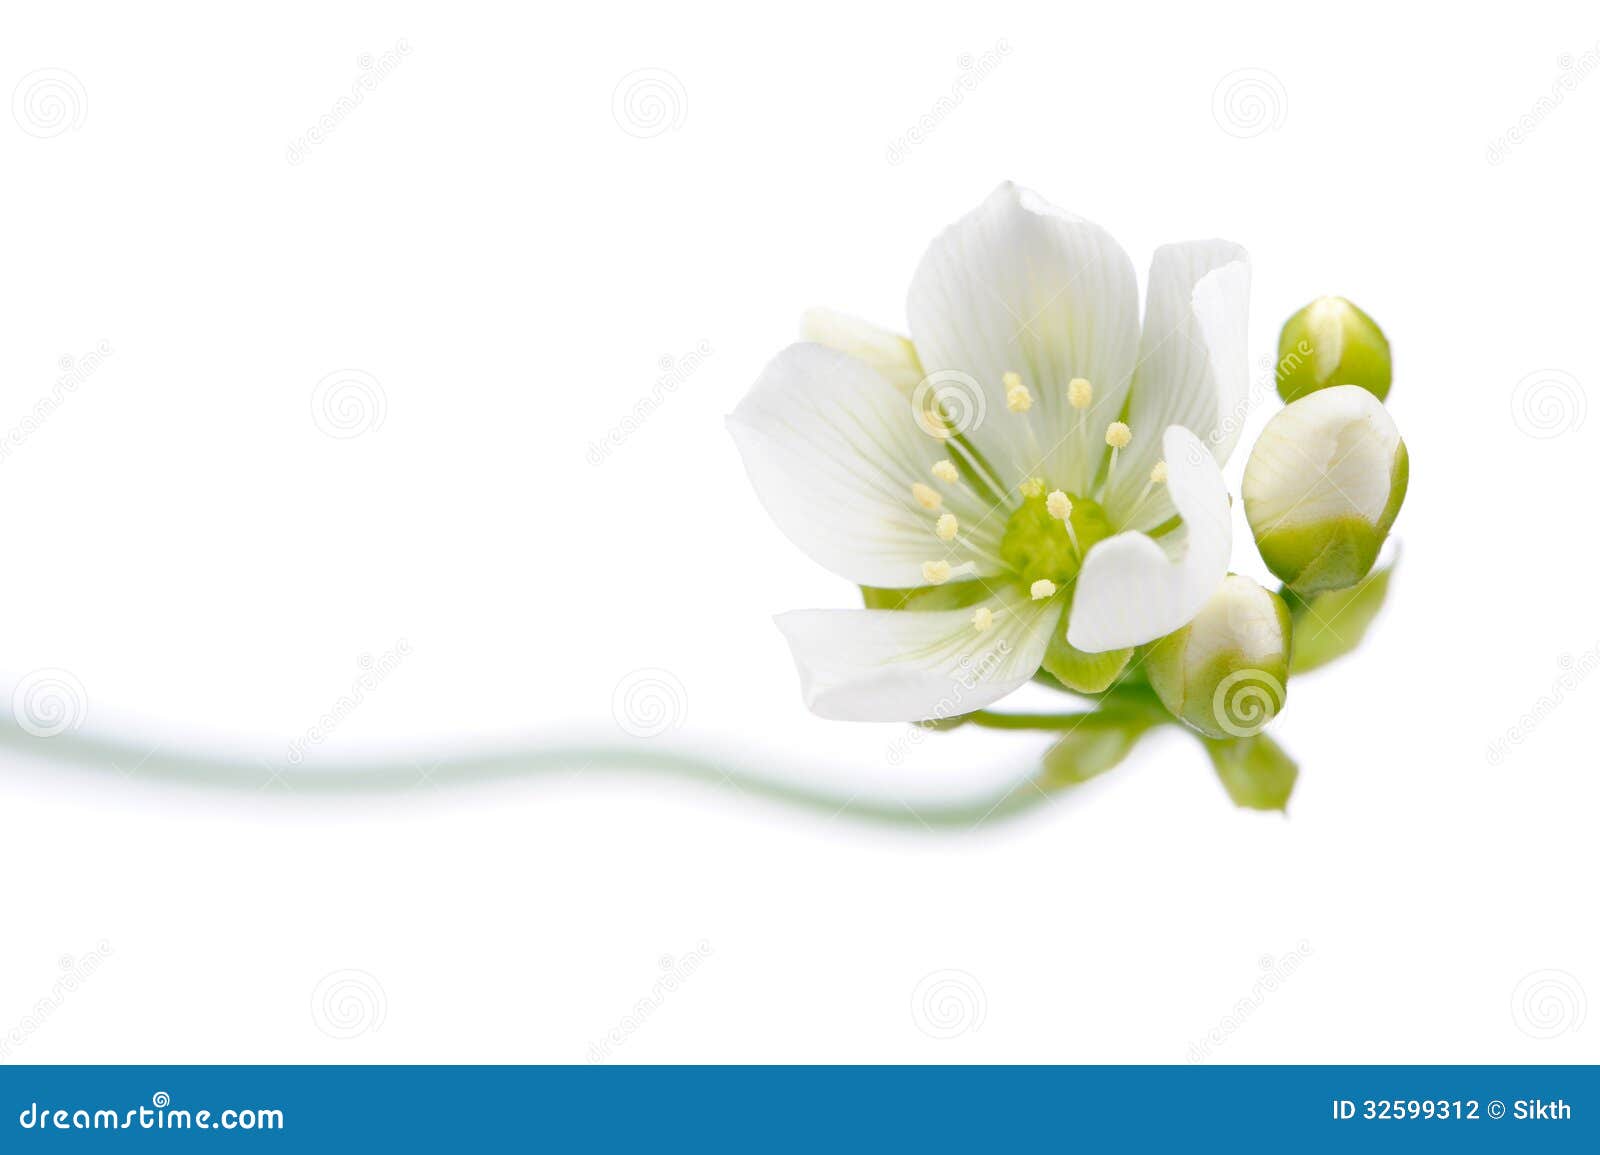 venus flytrap flower with buds on white background